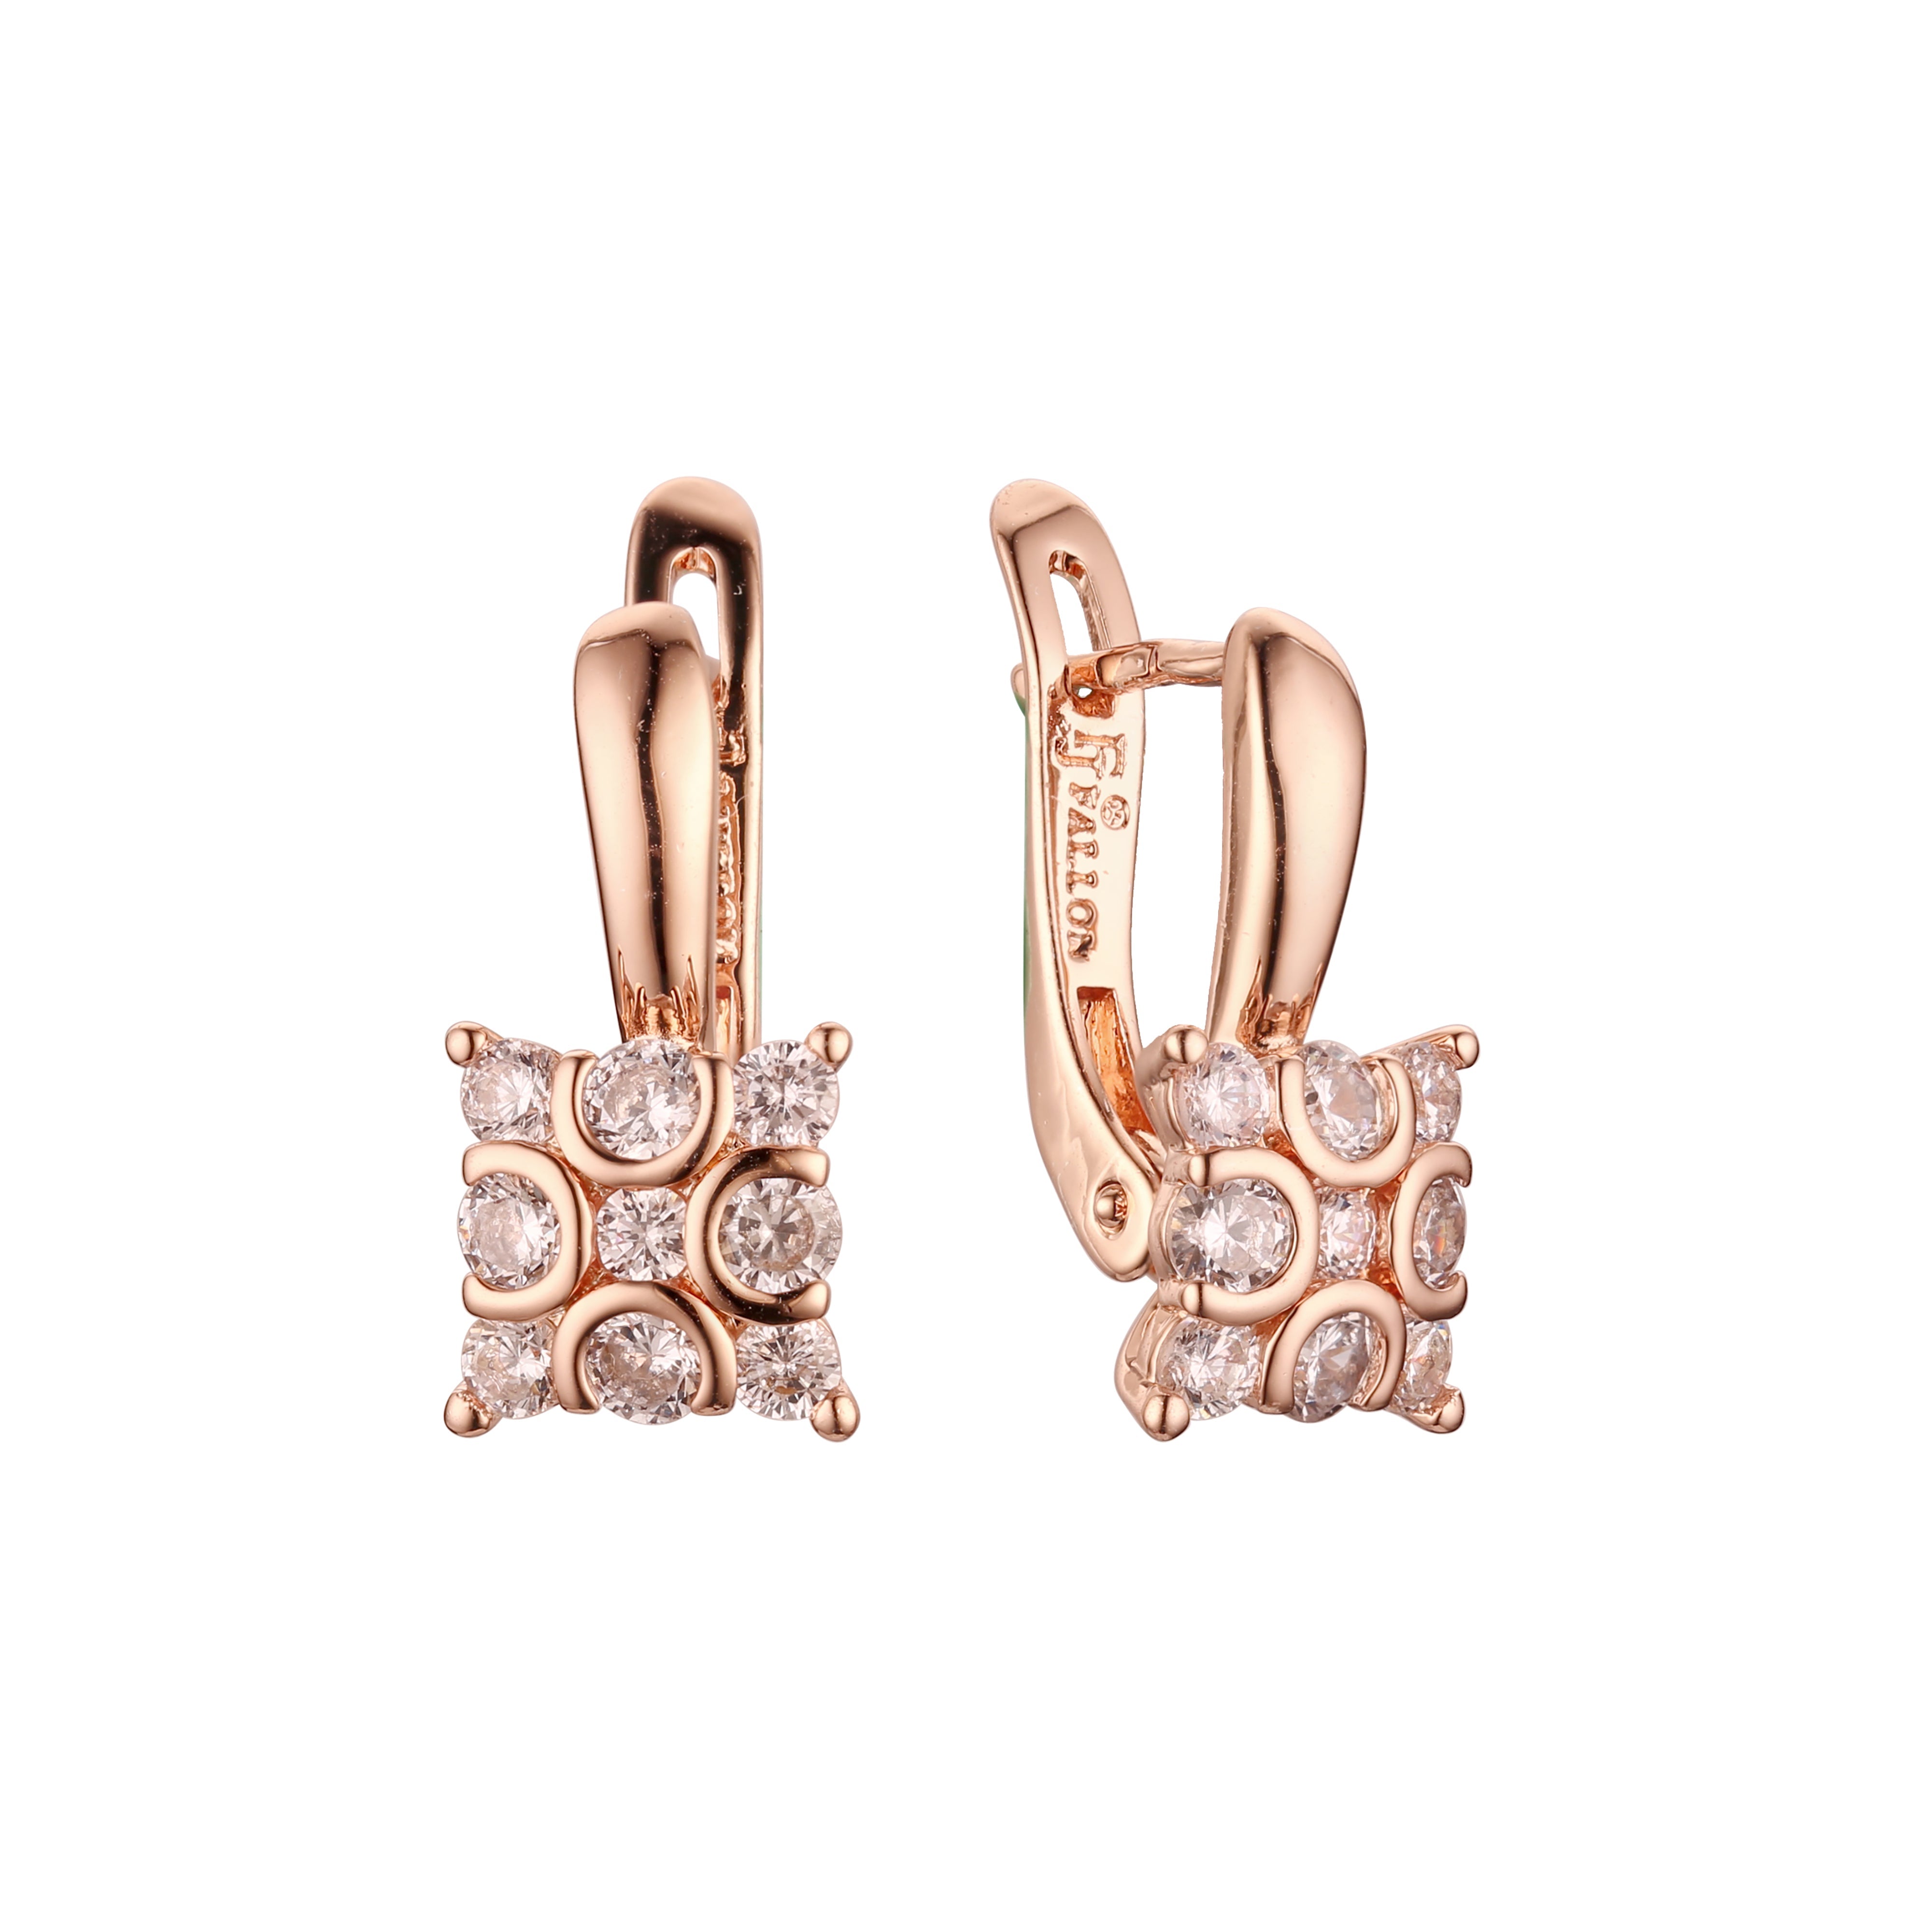 .Earrings in 14K Gold, Rose Gold plating colors